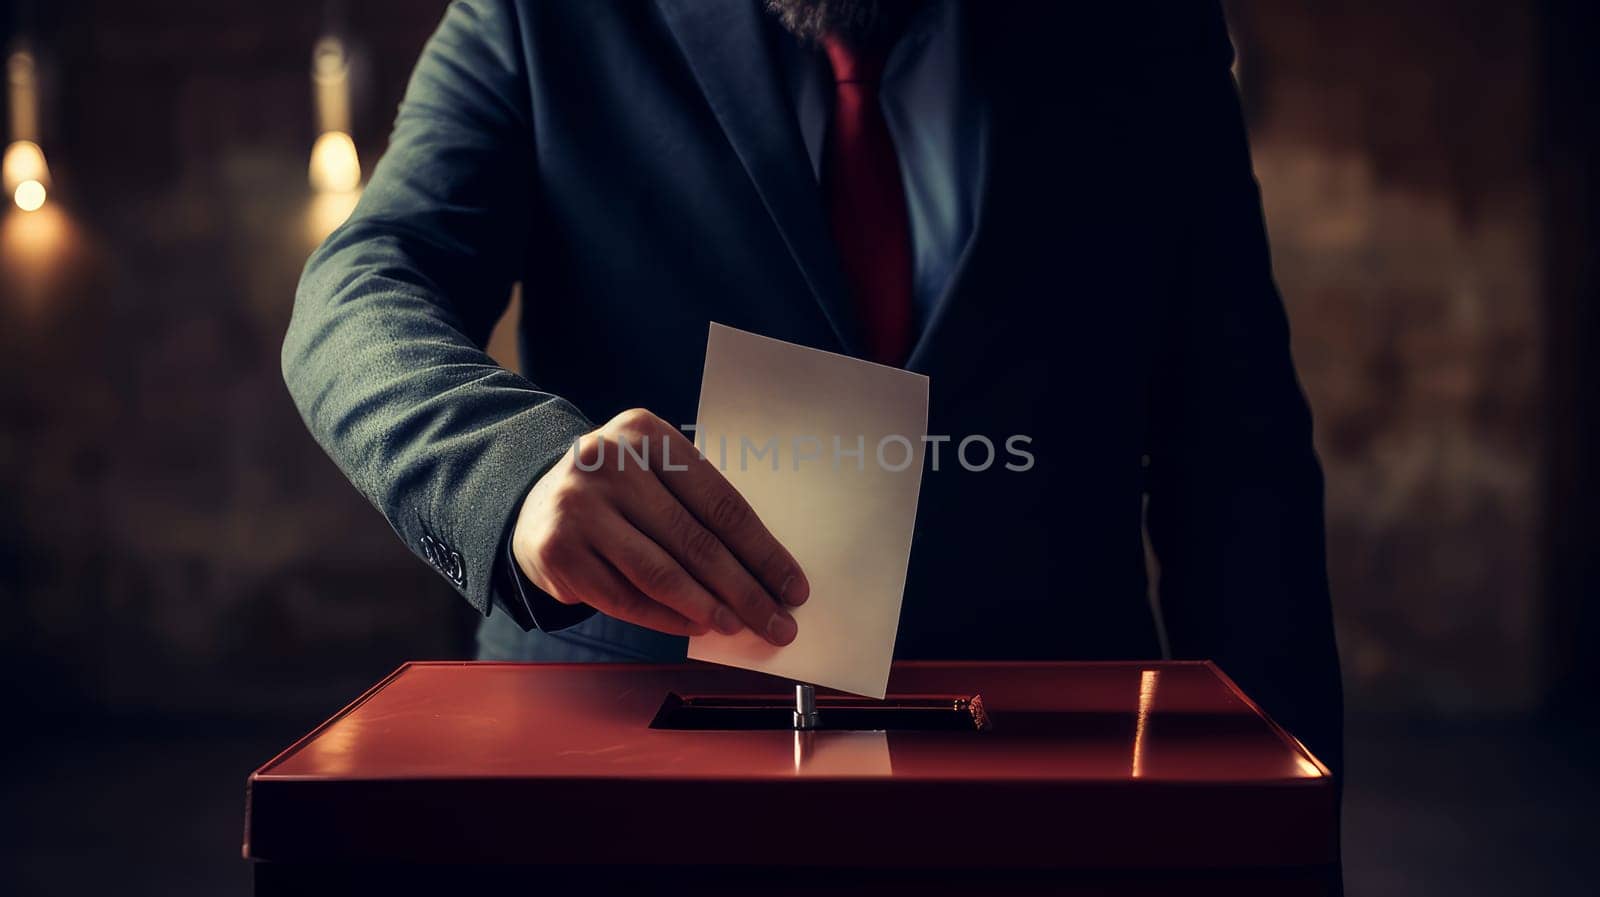 A man puts a ballot into the ballot box voting in the election. Awareness, decision making, choice